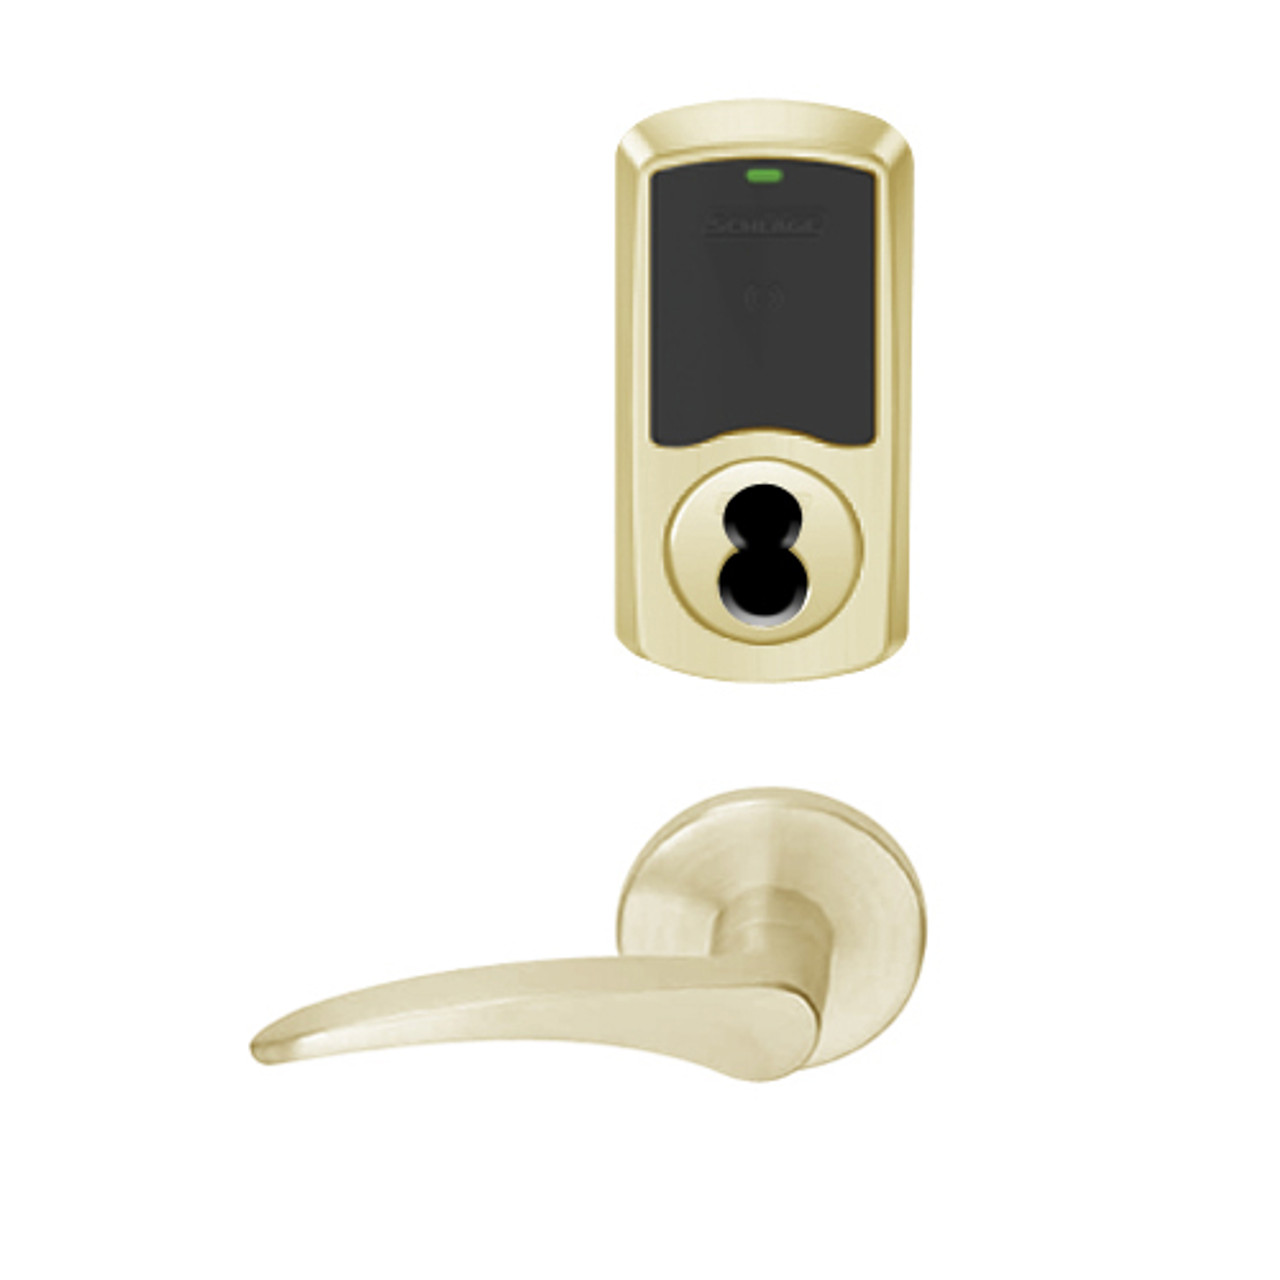 LEMD-GRW-BD-12-606-00B-LH Schlage Privacy/Apartment Wireless Greenwich Mortise Deadbolt Lock with LED and 12 Lever Prepped for SFIC in Satin Brass